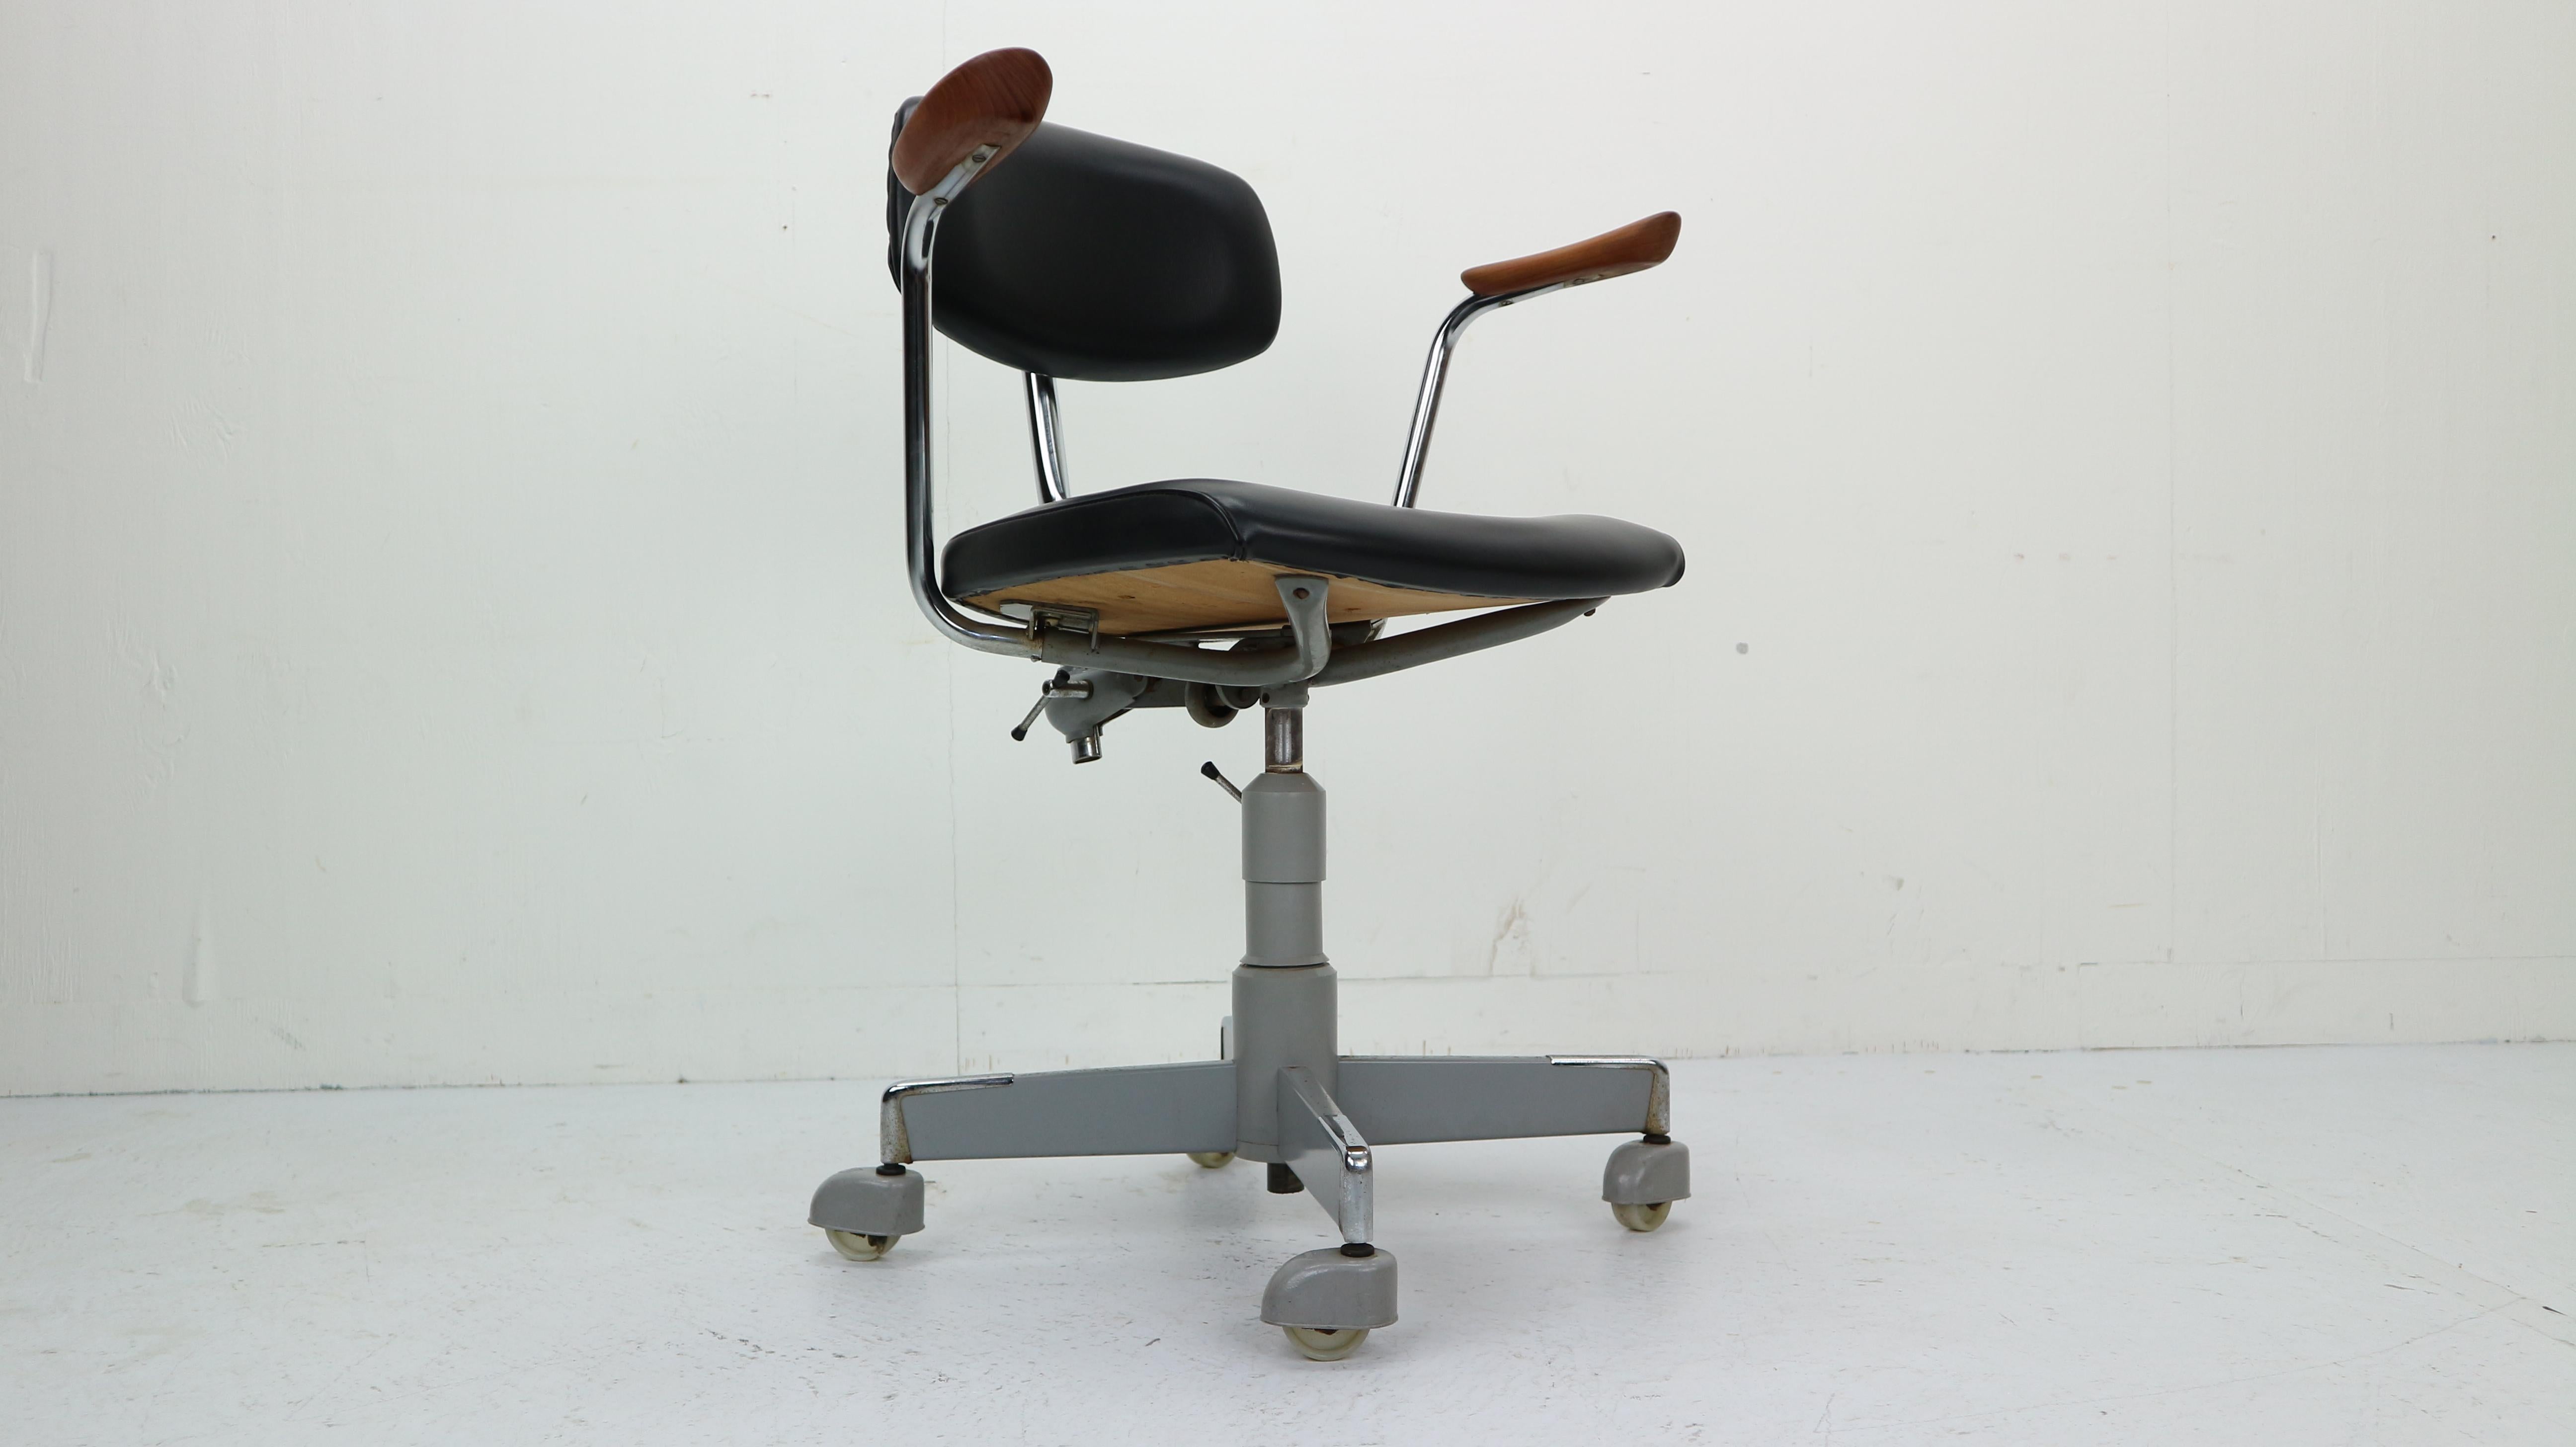 A swivel office desk chair on castors from the 1960s

with teak arm rests and black vinyl upholstered seat and back

The back and the seat height are adjustable.

Made in Norway by Hag furniture.

